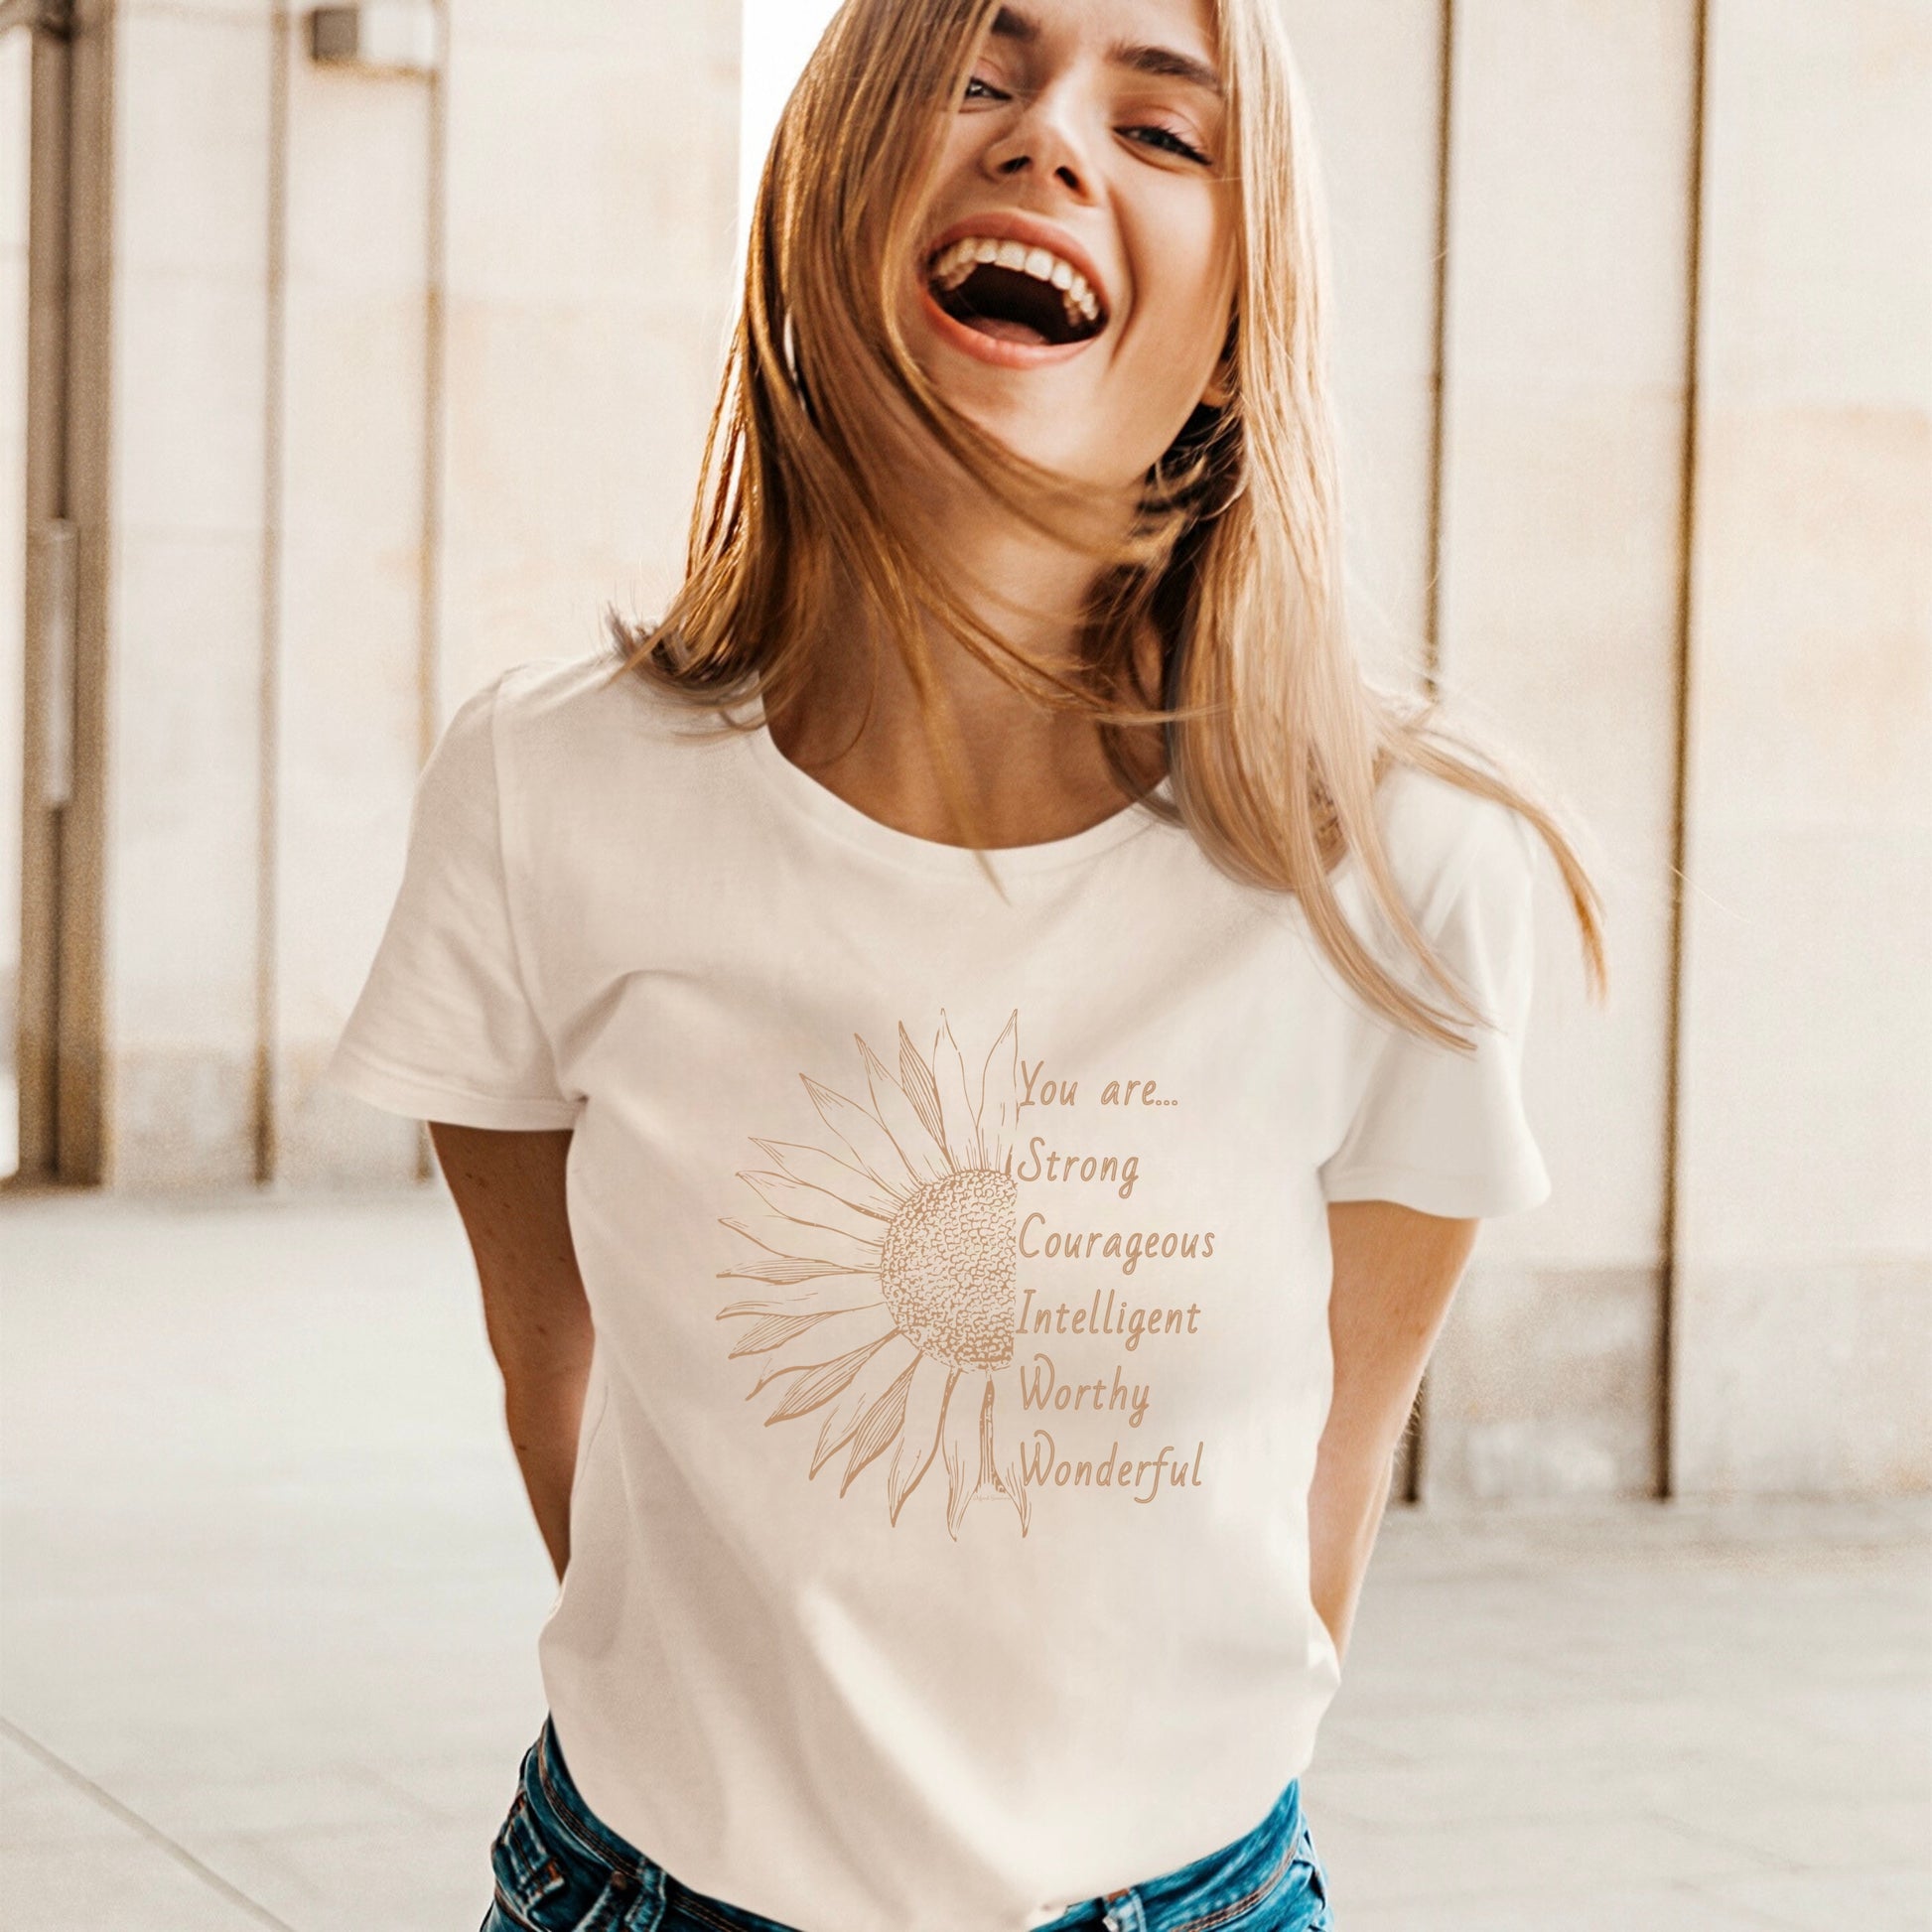 This thoughtfully designed shirt features a vibrant sunflower, symbolizing resilience and growth, accompanied by the powerful mantra: "You are strong, courageous, intelligent, worthy, and wonderful."